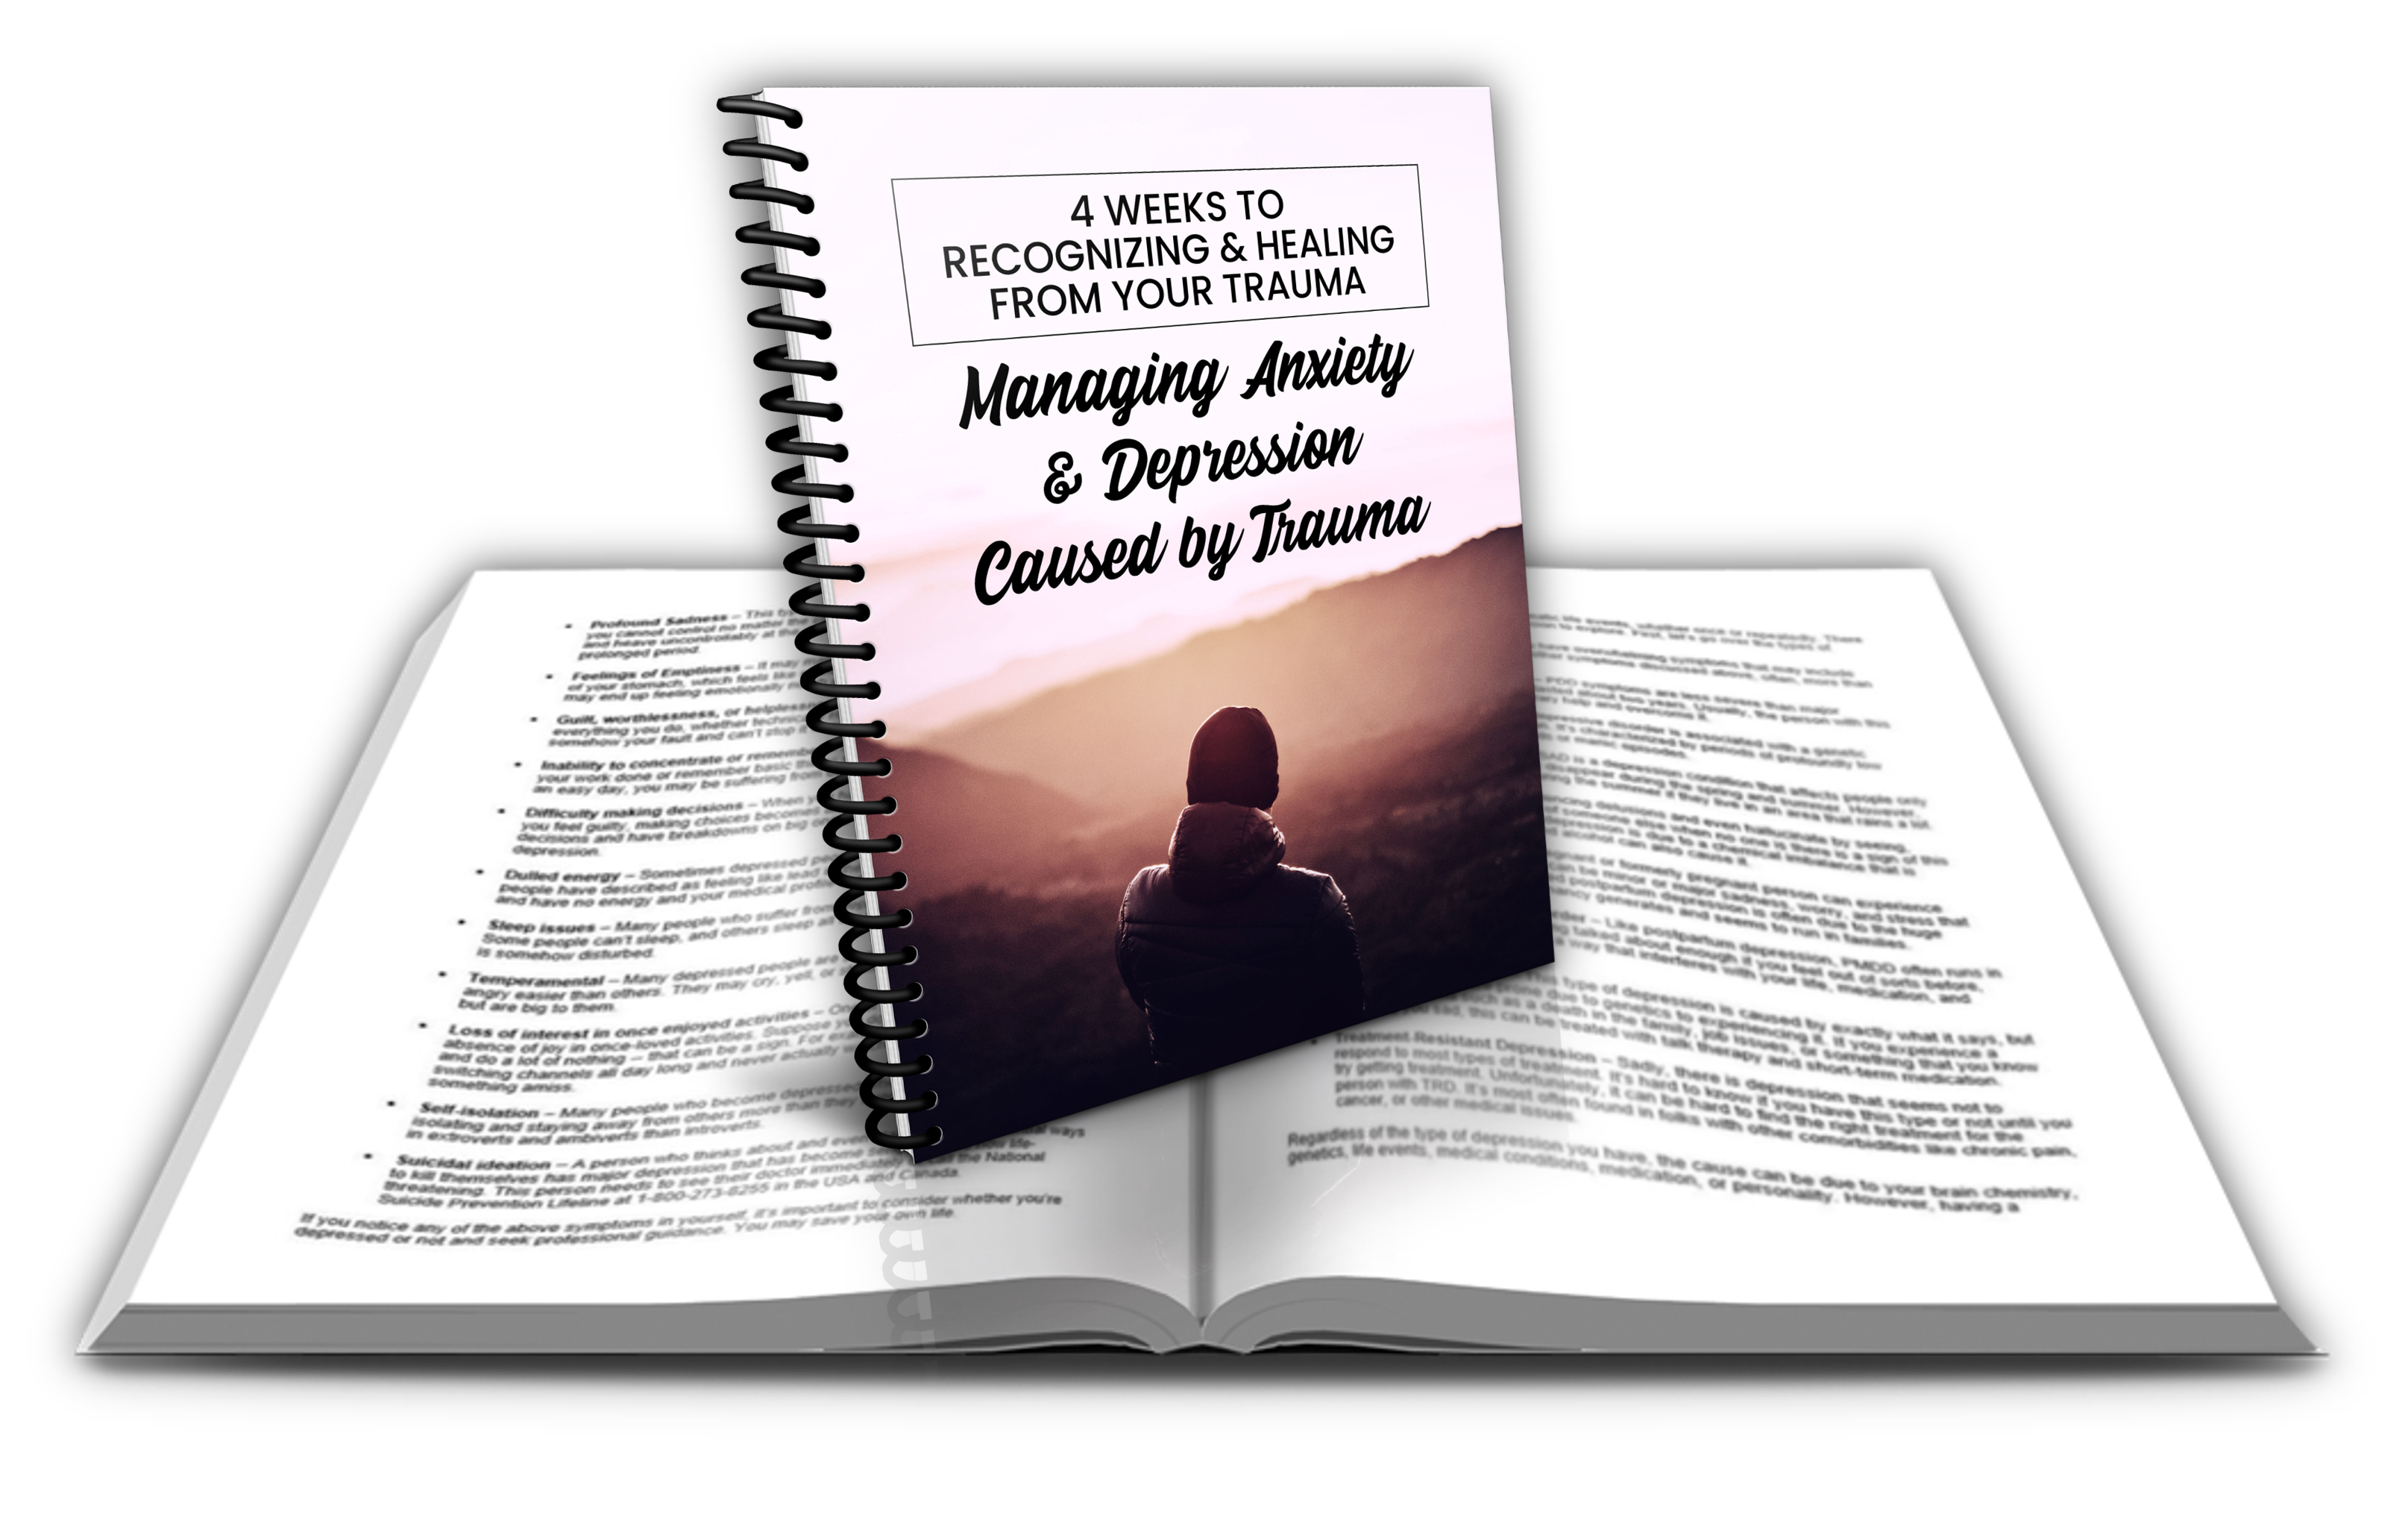 managing anxiety and depression report plr